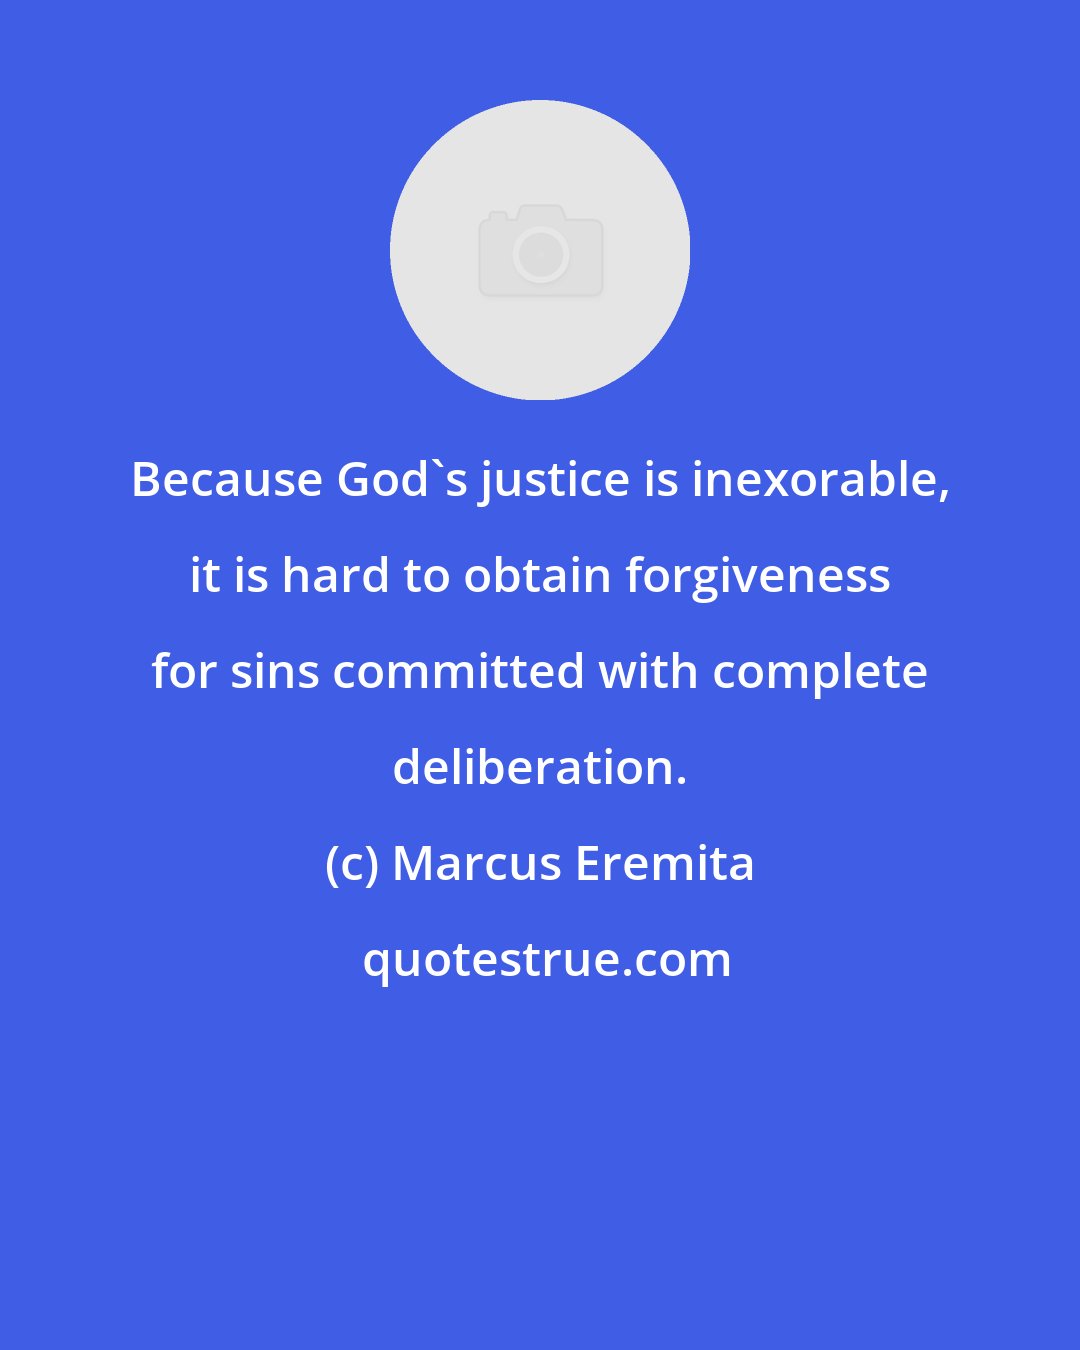 Marcus Eremita: Because God's justice is inexorable, it is hard to obtain forgiveness for sins committed with complete deliberation.